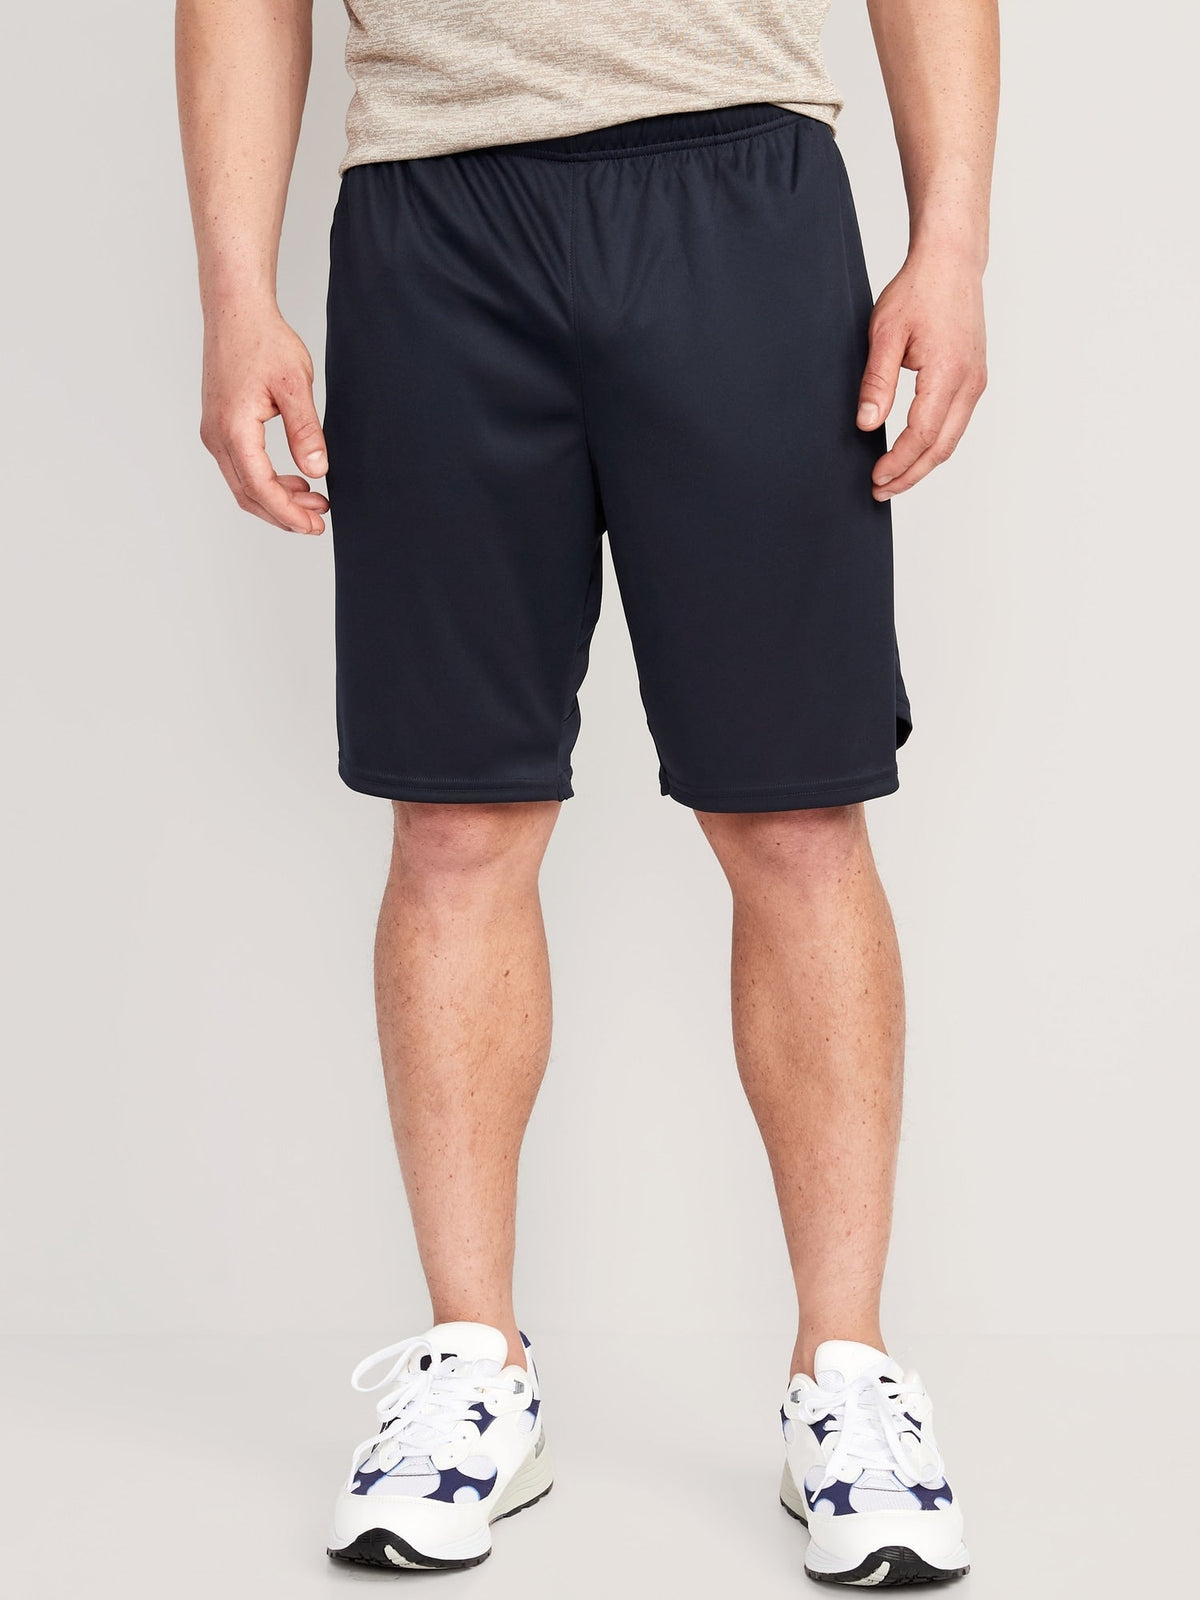 Old Navy Go-Dry Mesh Performance Shorts for Men - 9-inch inseam